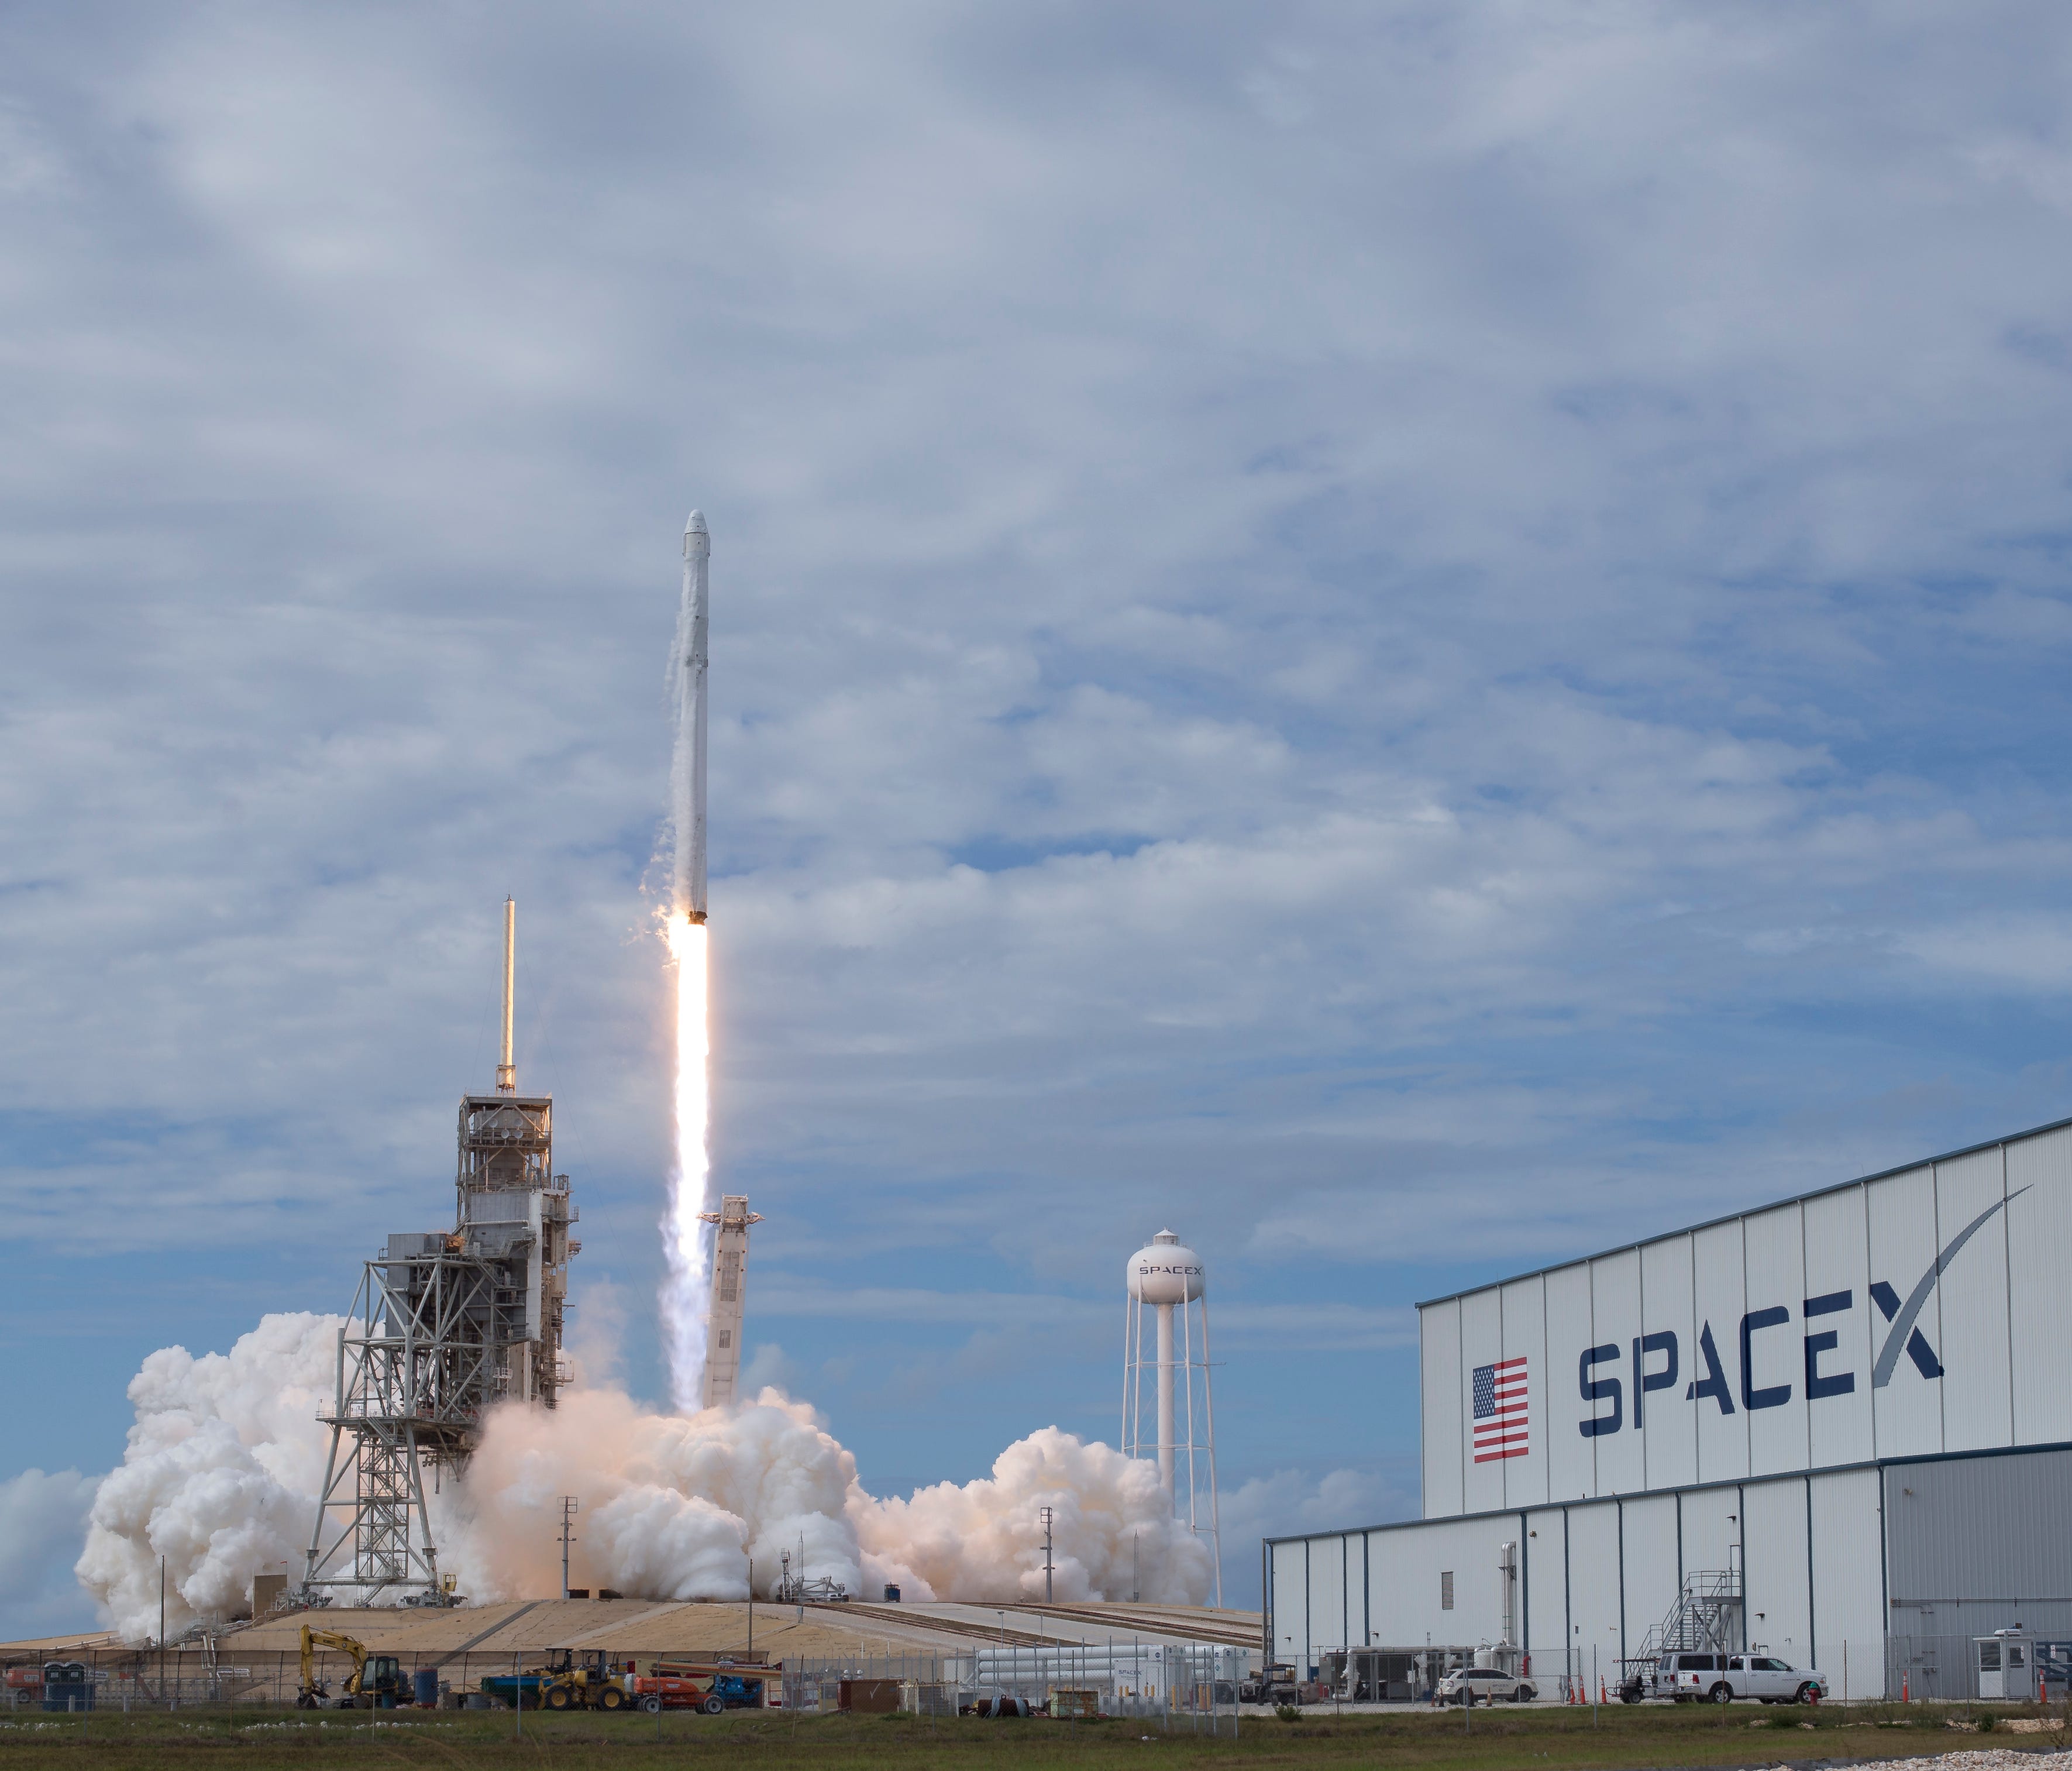 CAPE CANAVERAL, FL - JUNE 03:  In this handout provided by the National Aeronautics and Space Administration (NASA), the SpaceX Falcon 9 rocket, with the Dragon spacecraft onboard, launches from pad 39A at NASA's Kennedy Space Center on June 3, 2017 